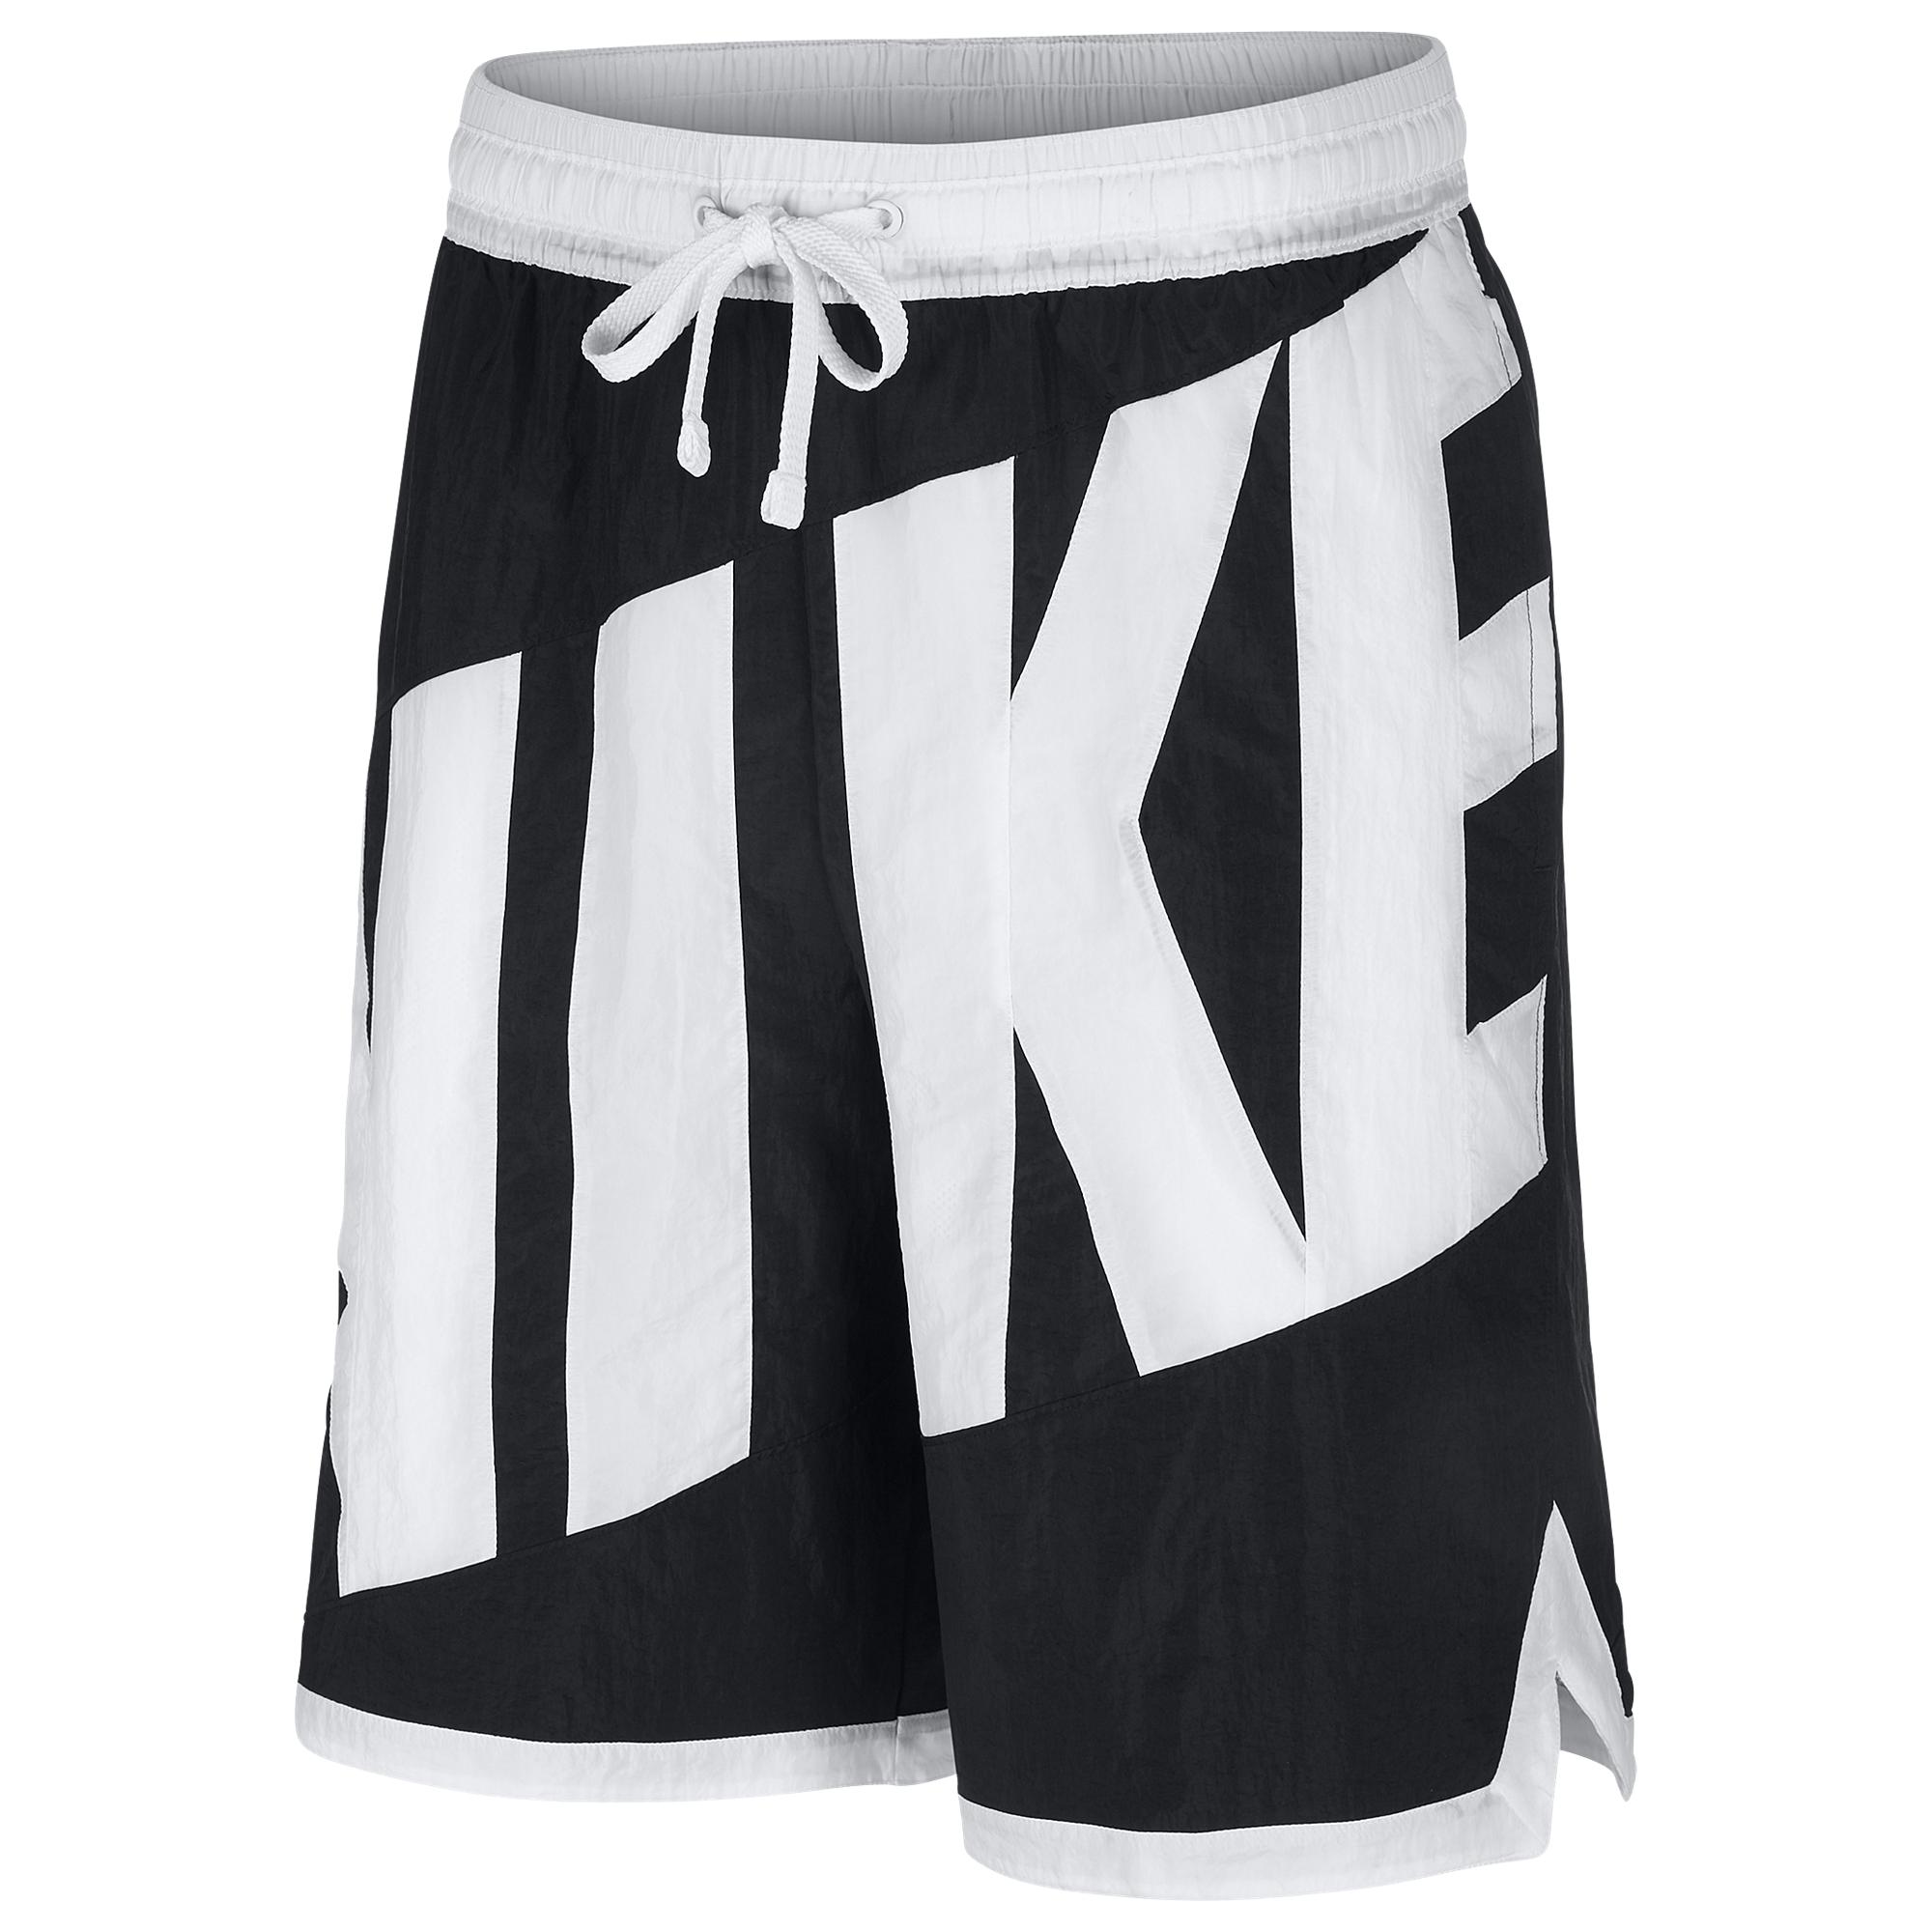 Buy > nike throwback graphic shorts > in stock